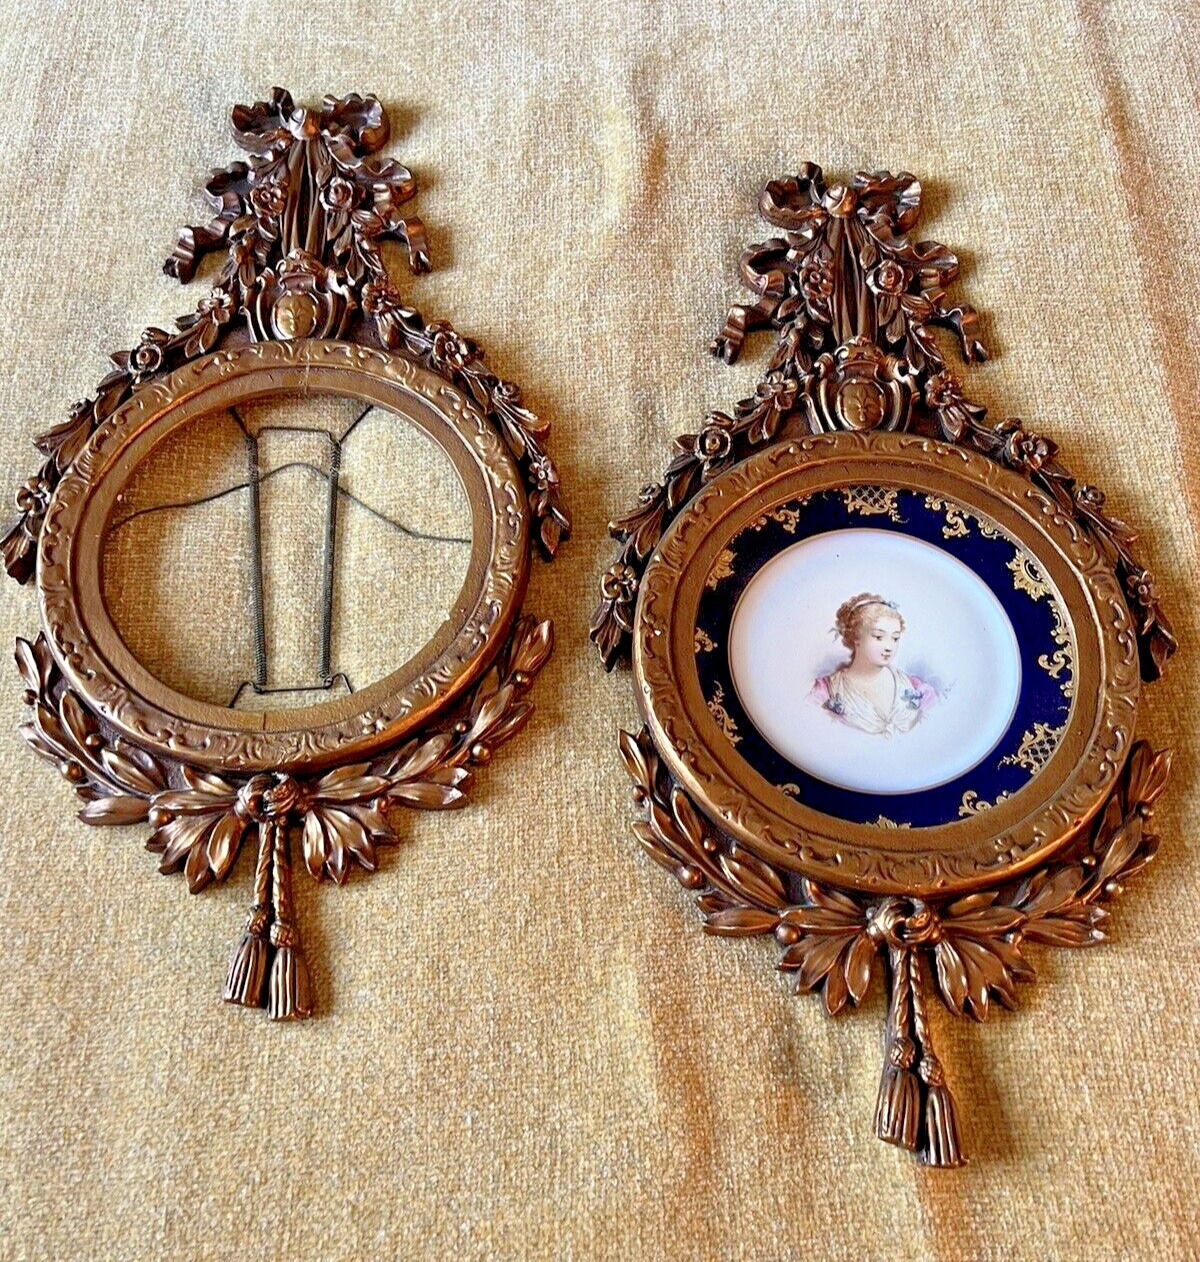 Chateau Des Tuileries Sevres Plate S37 Pair European Wall Plaque RARE Must SEE